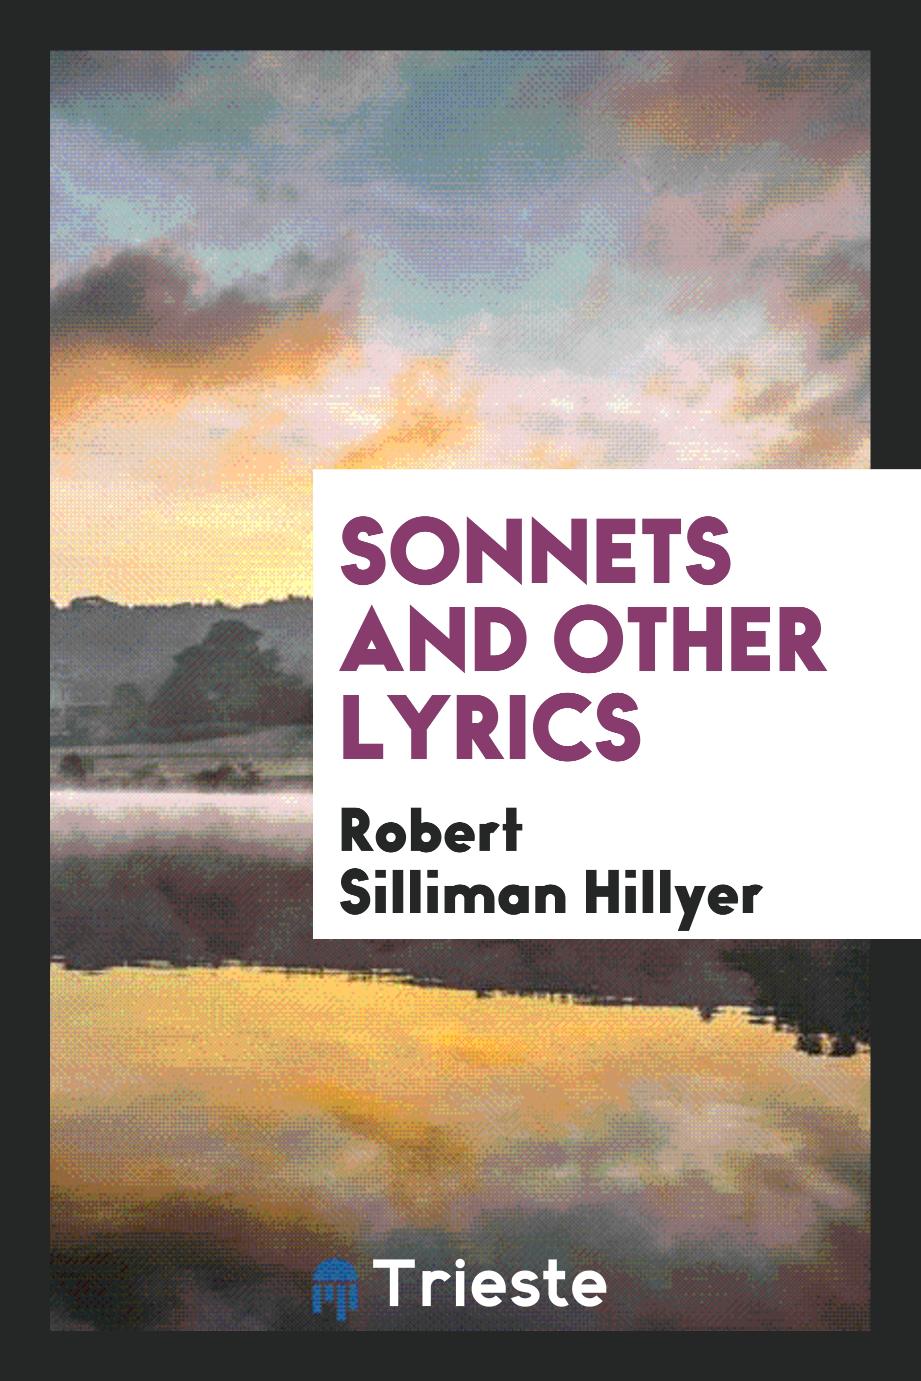 Sonnets and other lyrics